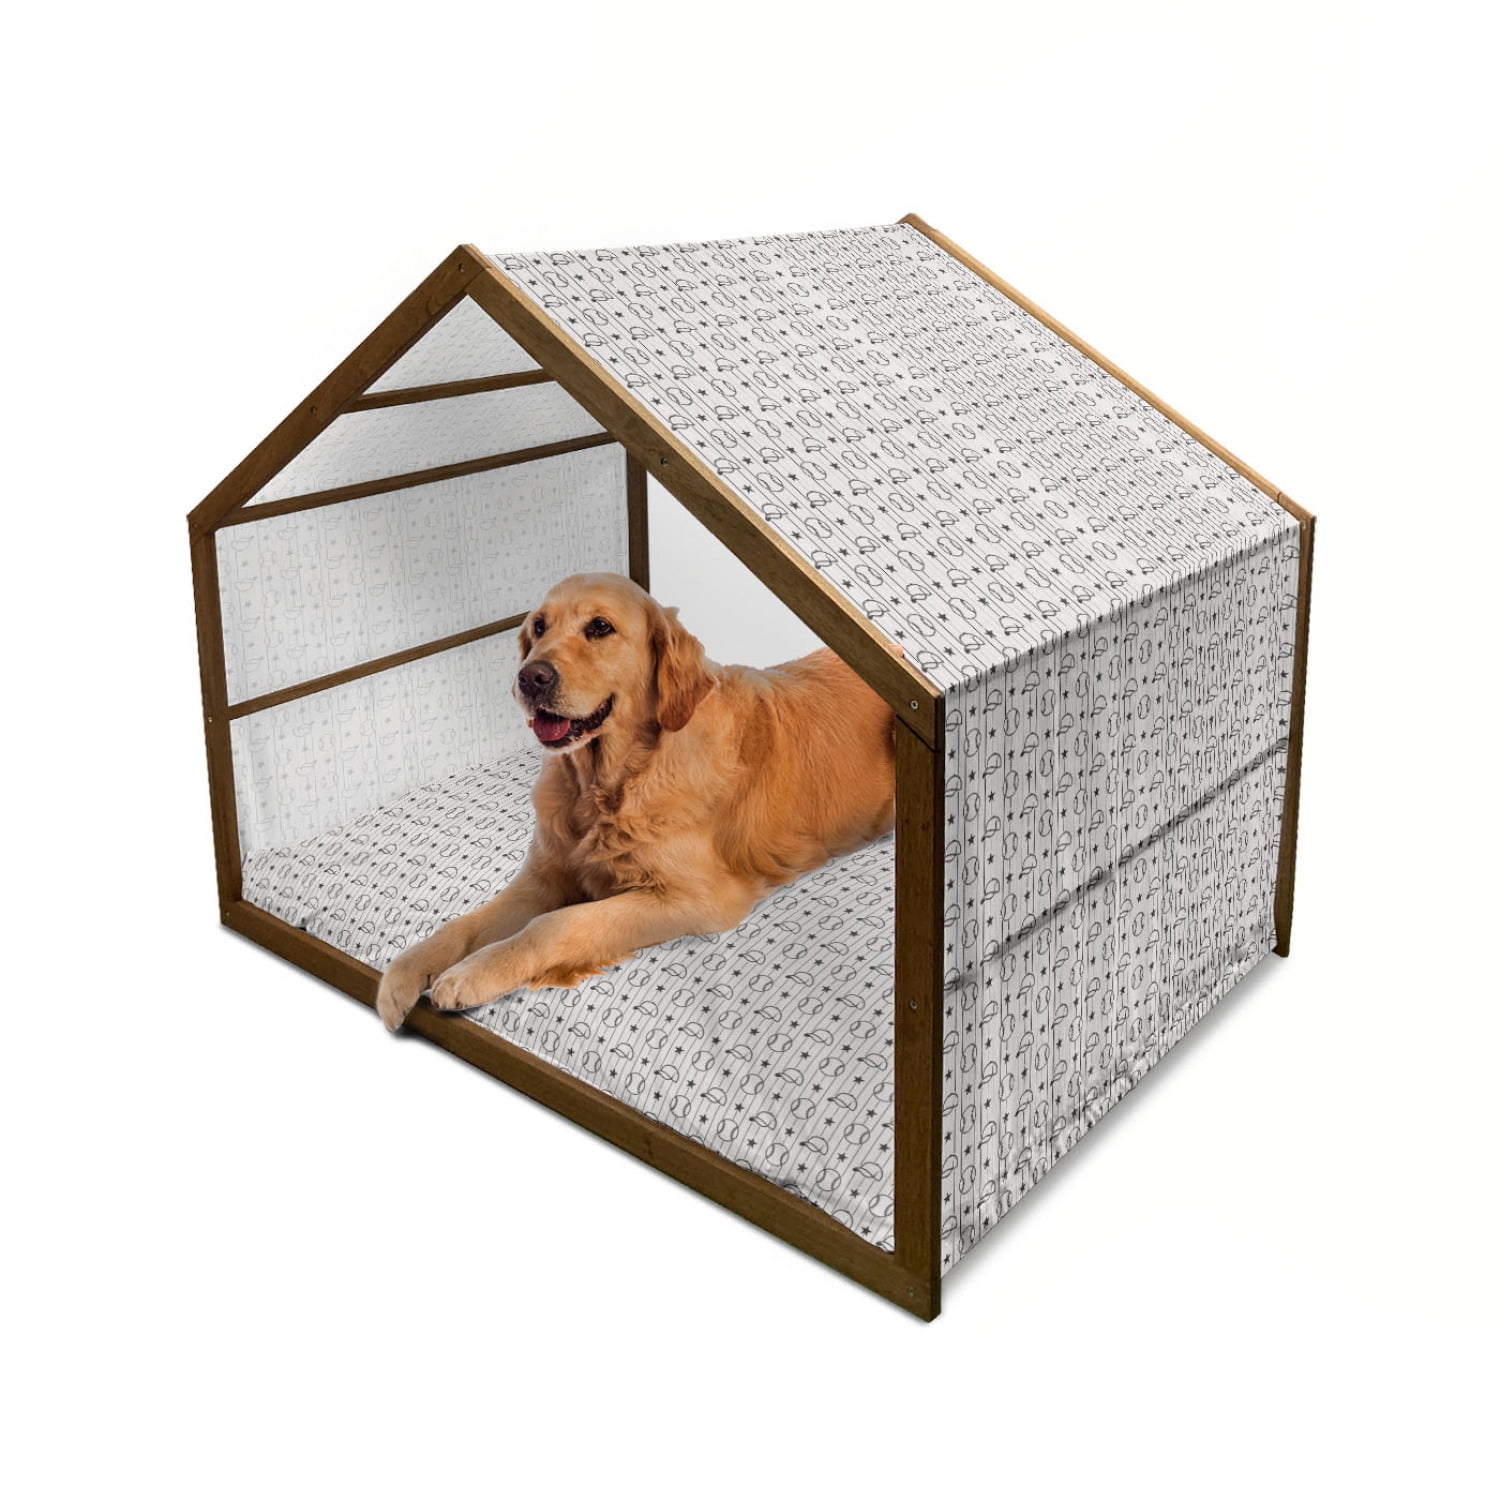 Baseball Pet House Stars Caps And Vertical Lines Pattern Monochrome